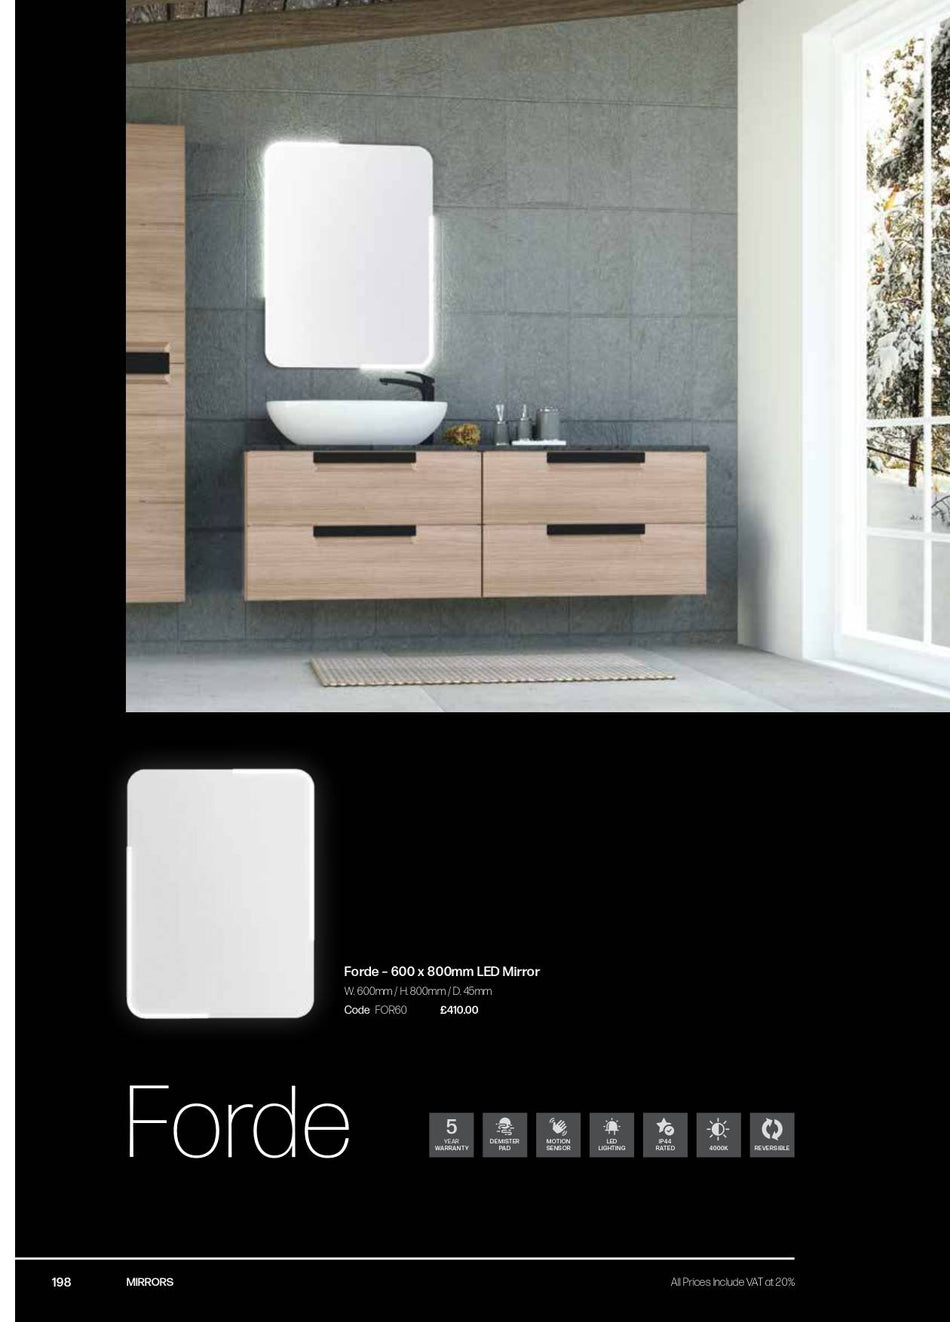 Forde – 600 x 800mm LED Mirror